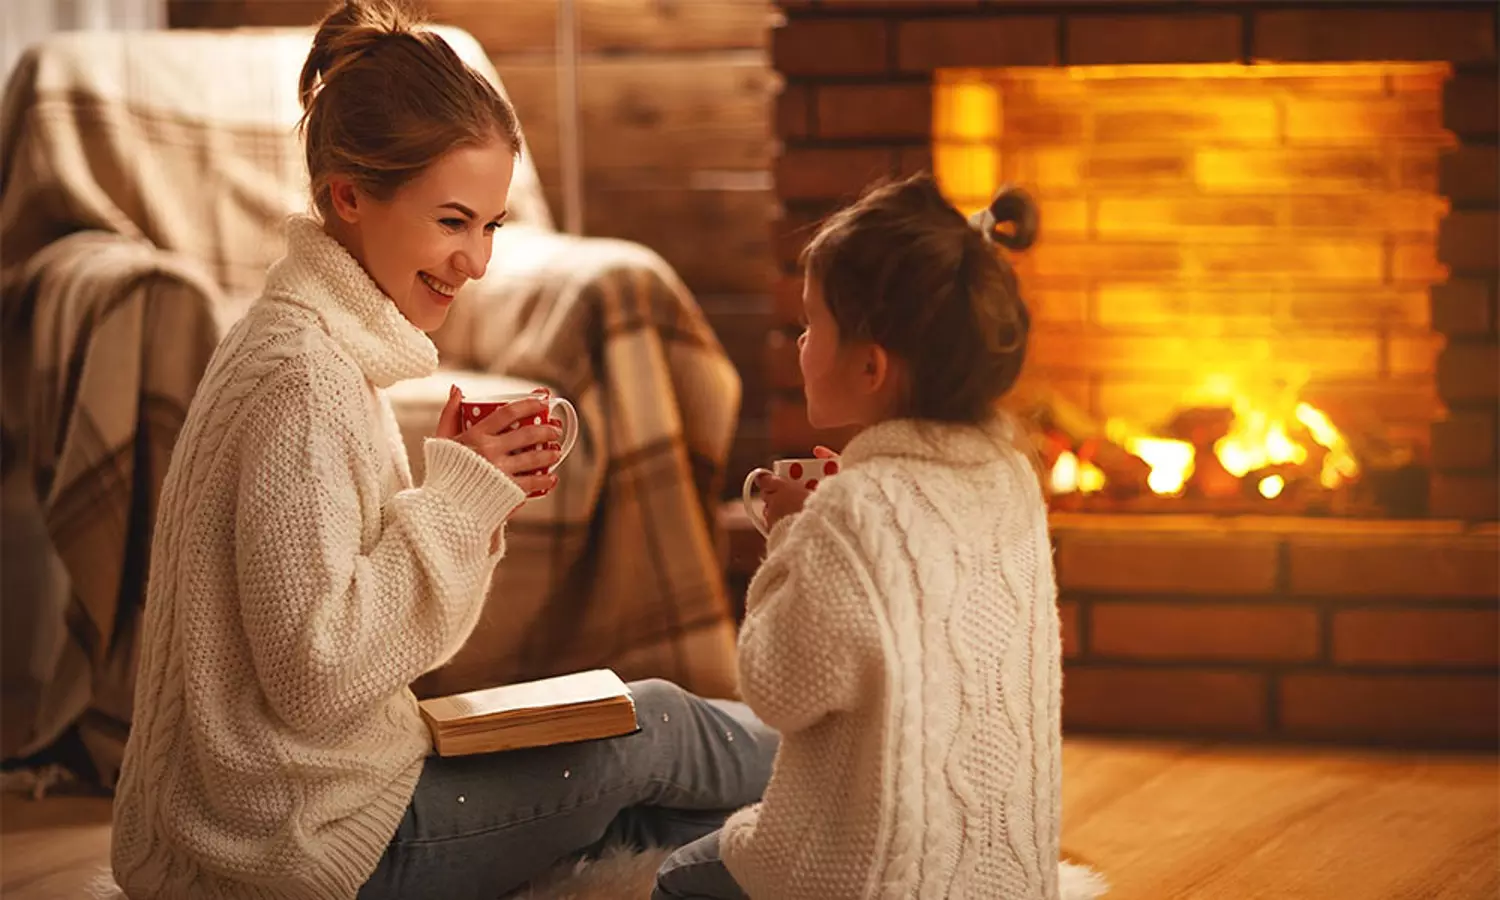 easy hacks and tips to make your home warm